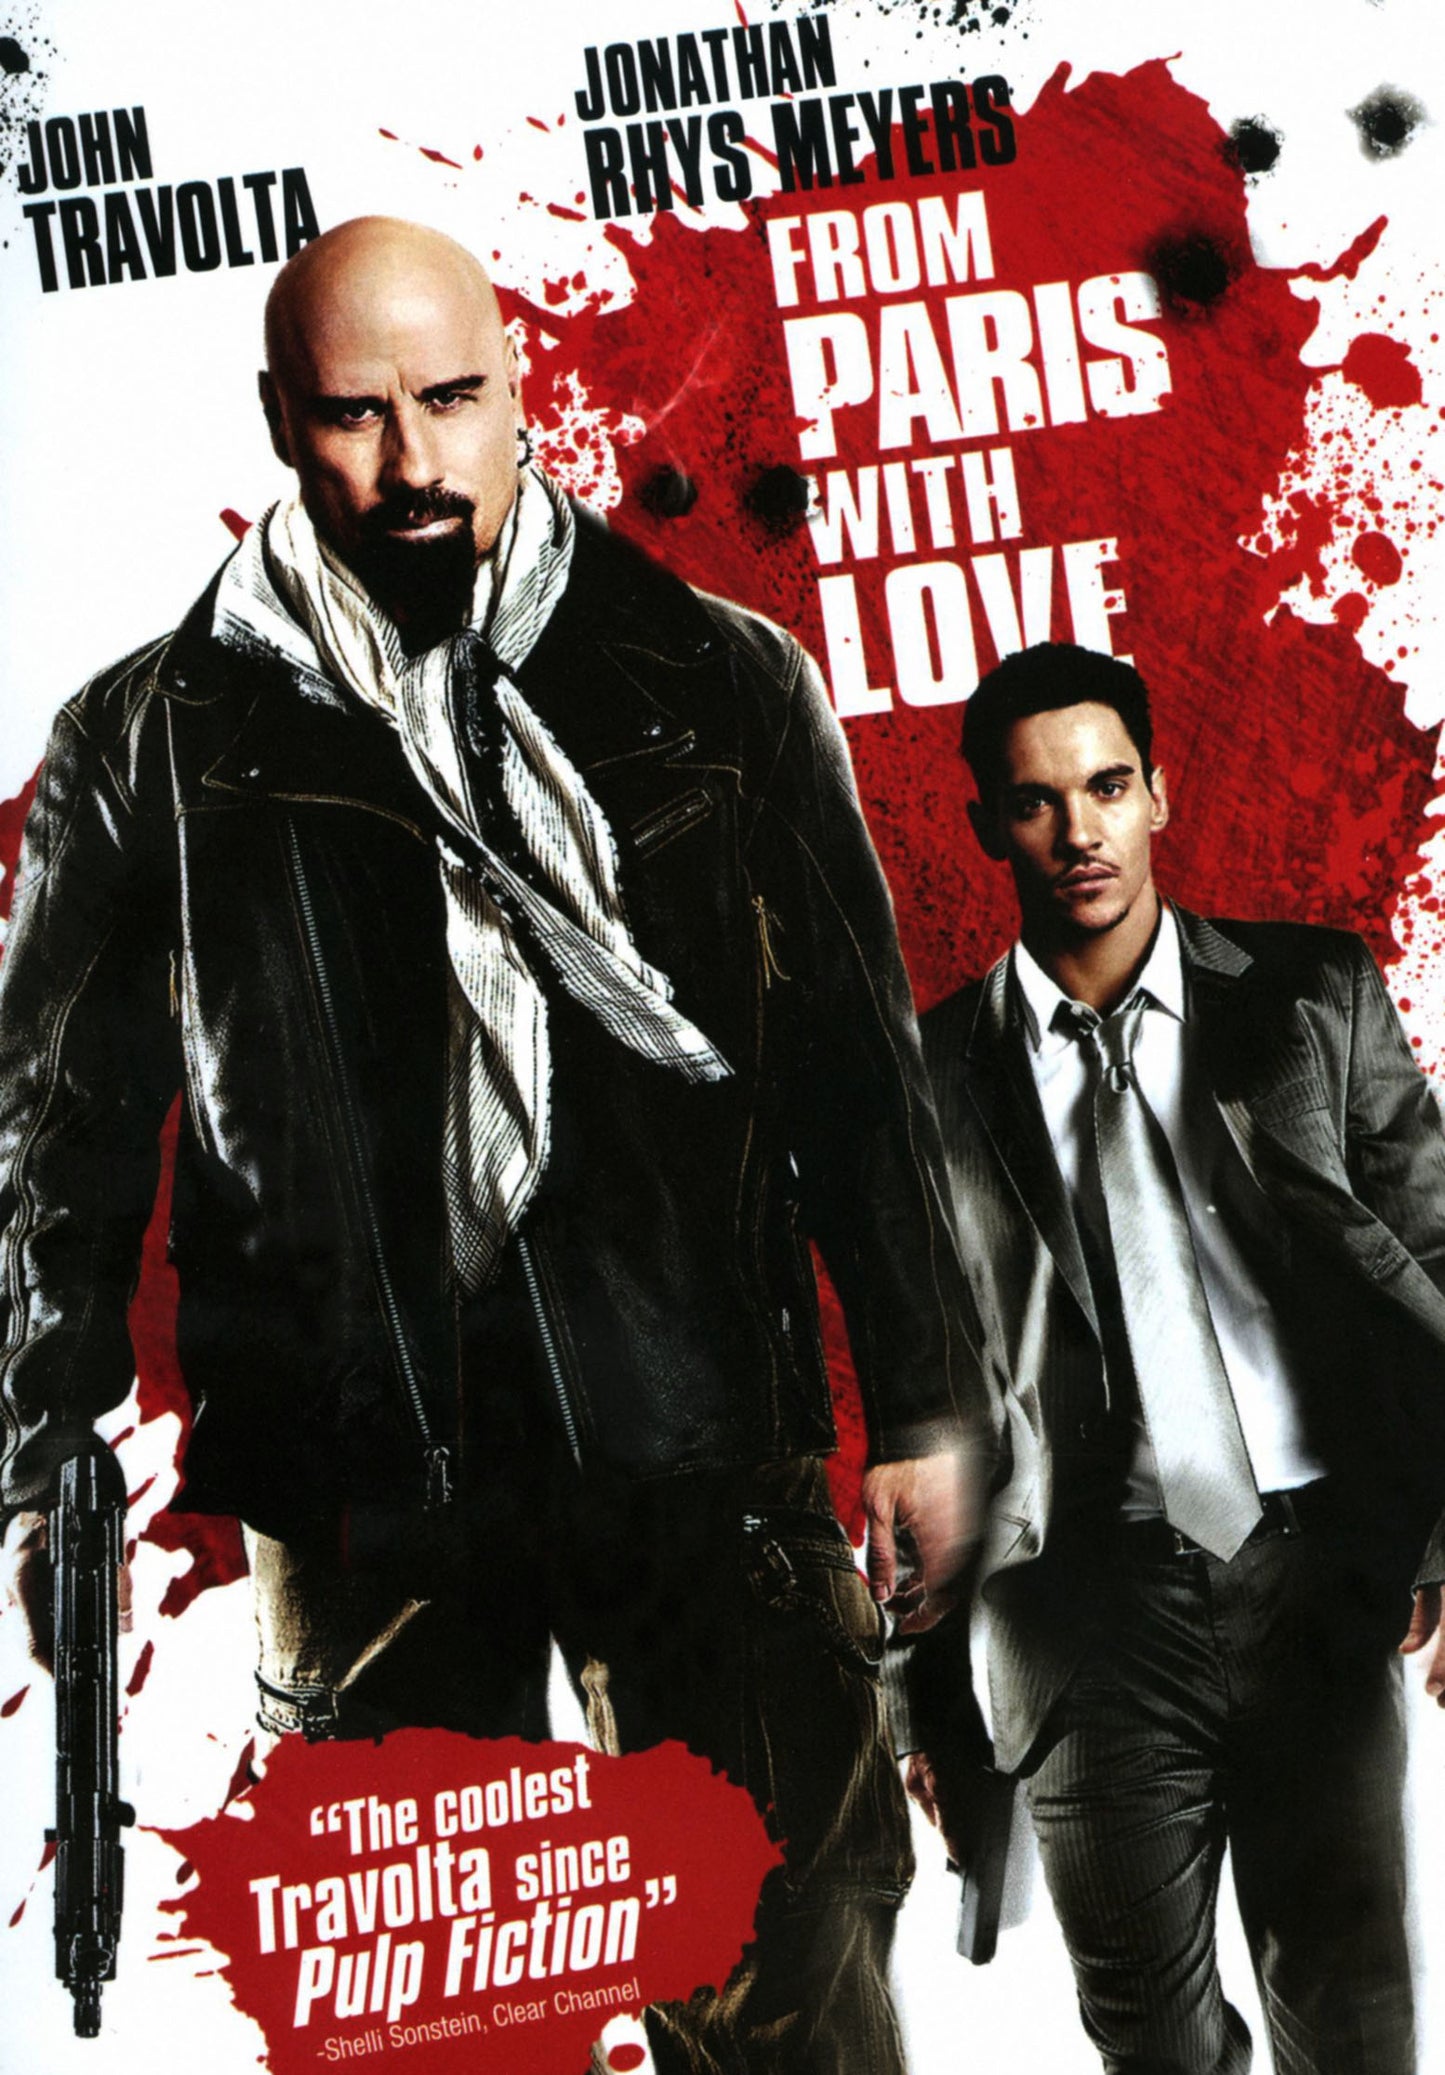 From Paris With Love cover art